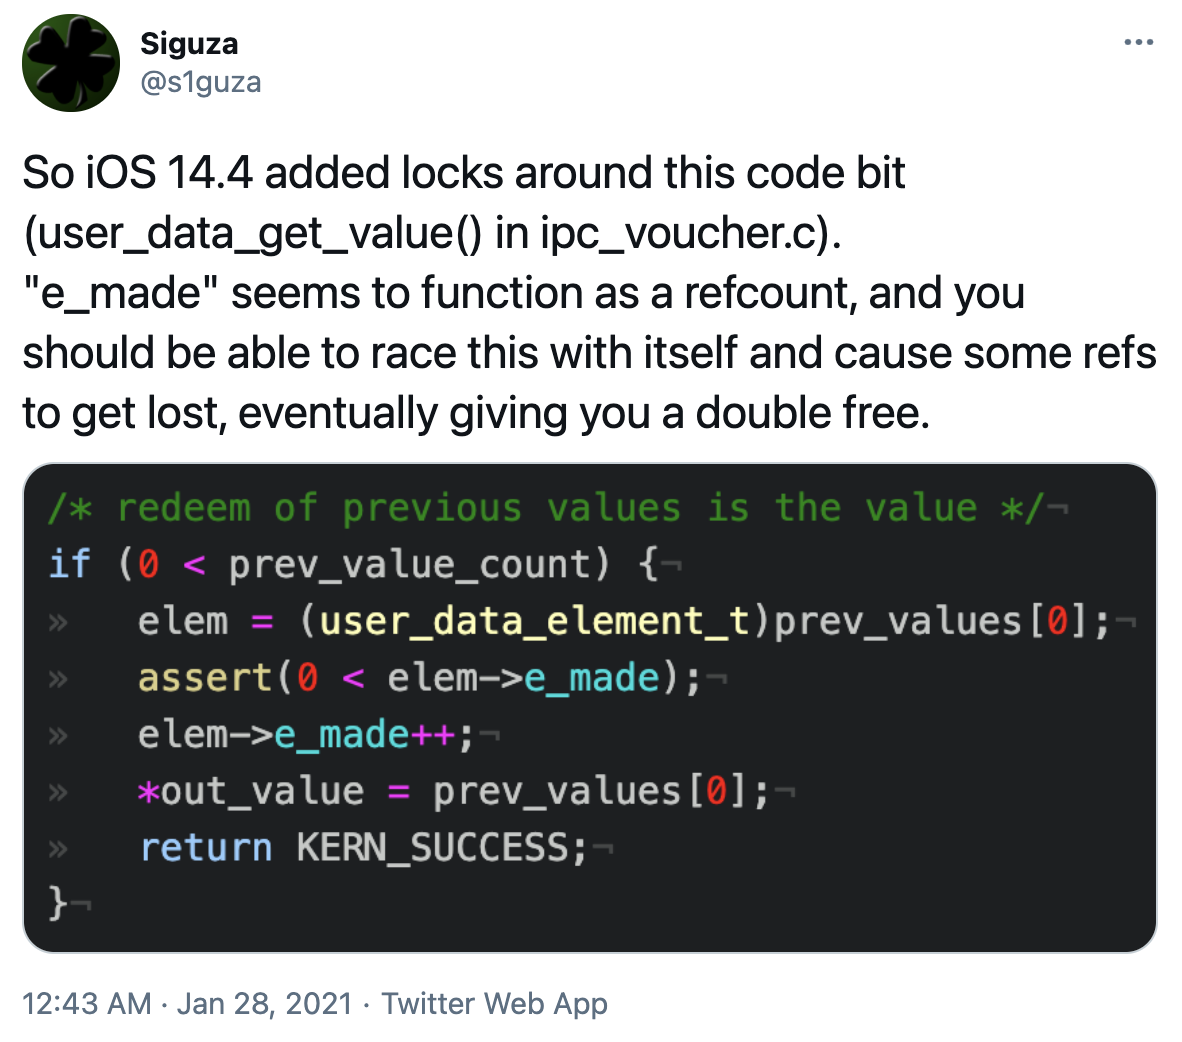 "So iOS 14.4 added locks around this code bit (user_data_get_value() in ipc_voucher.c). "e_made" seems to function as a refcount, and you should be able to race this with itself and cause some refs to get lost, eventually giving you a double free"